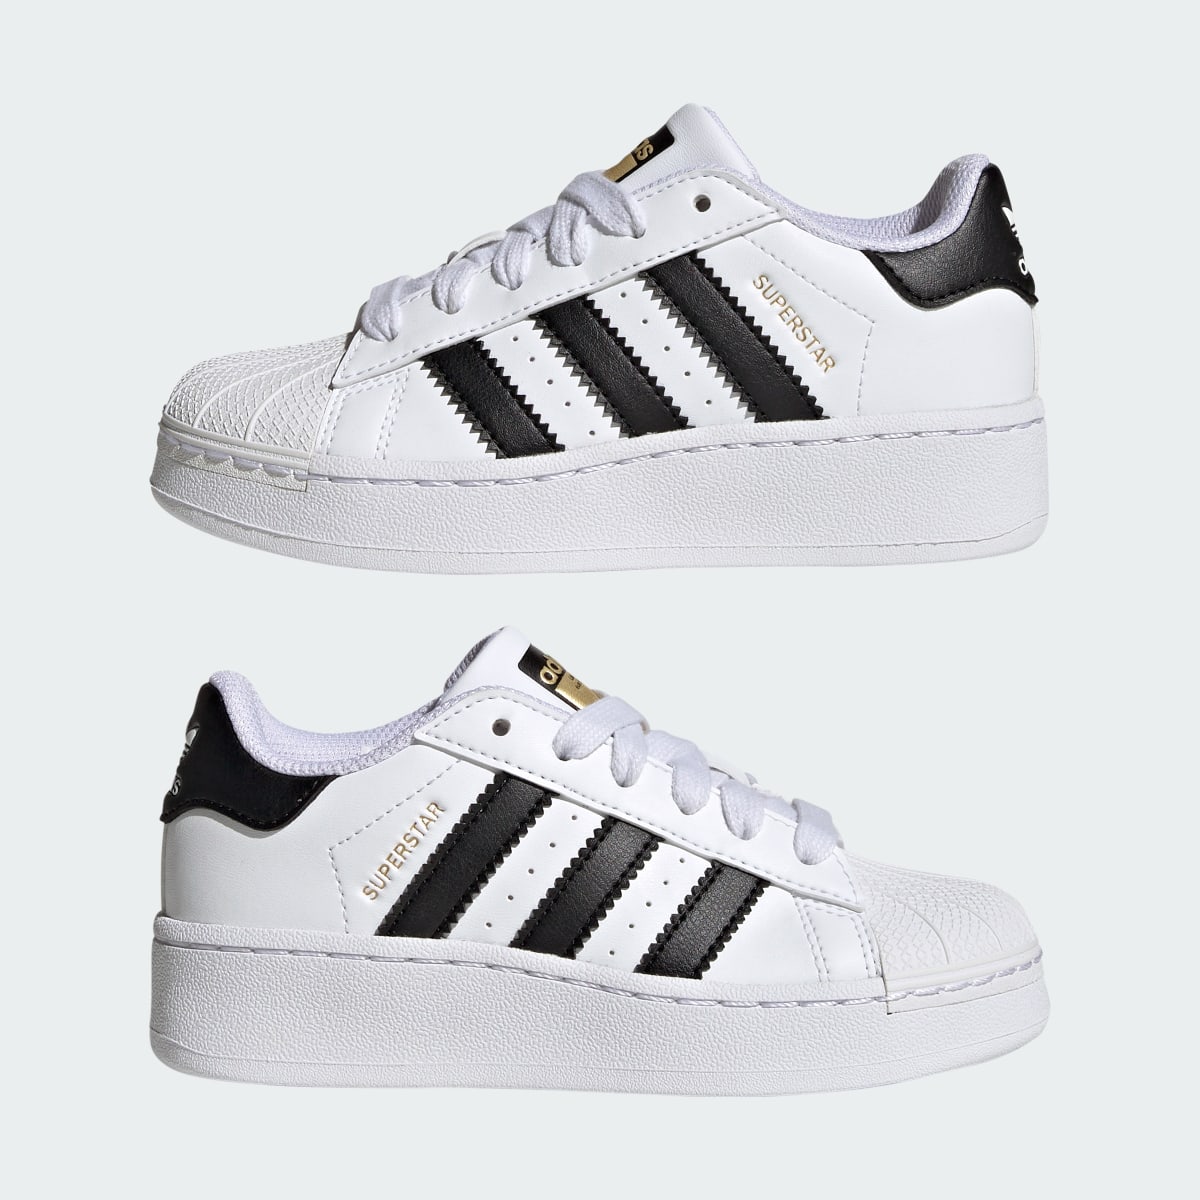 Adidas Superstar XLG Shoes Kids. 8